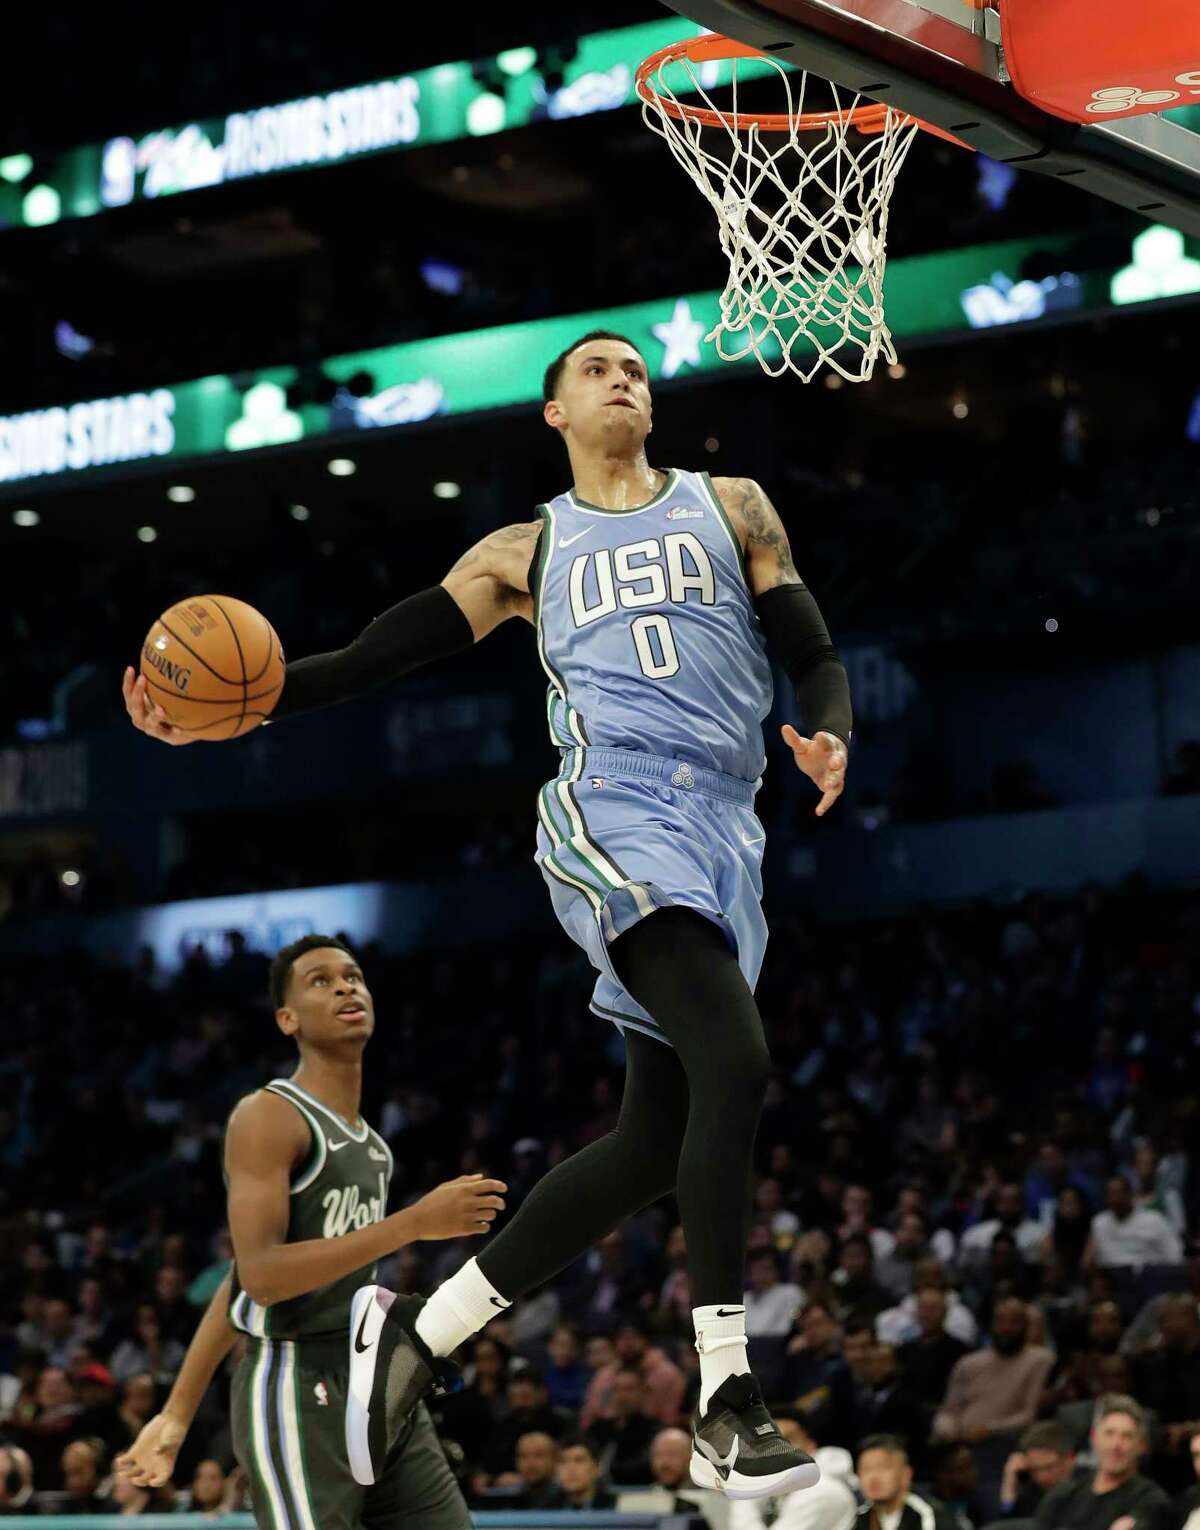 U.S. Team's Kyle Kuzma, of the Los Angeles Lakers heads to the hoop for a dunk against the World Team during the NBA All-Star Rising Stars basketball game, Friday, Feb. 15, 2019, in Charlotte, N.C. (AP Photo/Chuck Burton)